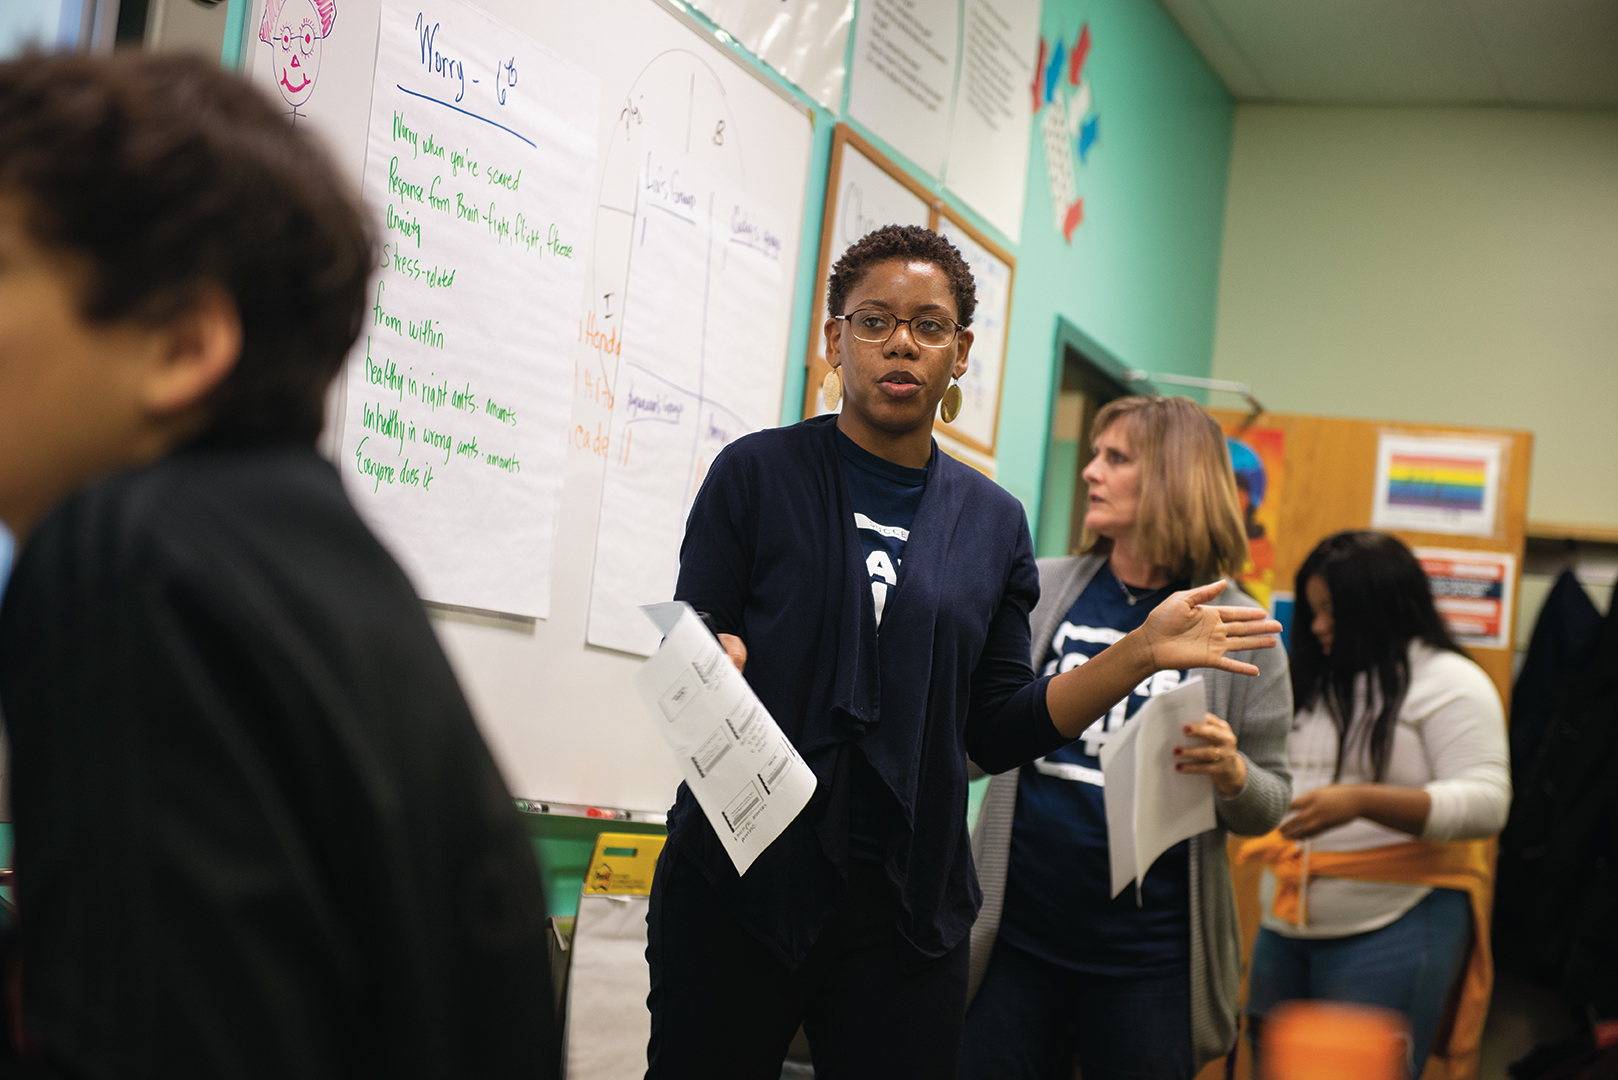 Schools in Champaign and Urbana are working closely with Illinois State faculty and students on a federally funded project aimed at helping at-risk youth develop relationship and job skills.